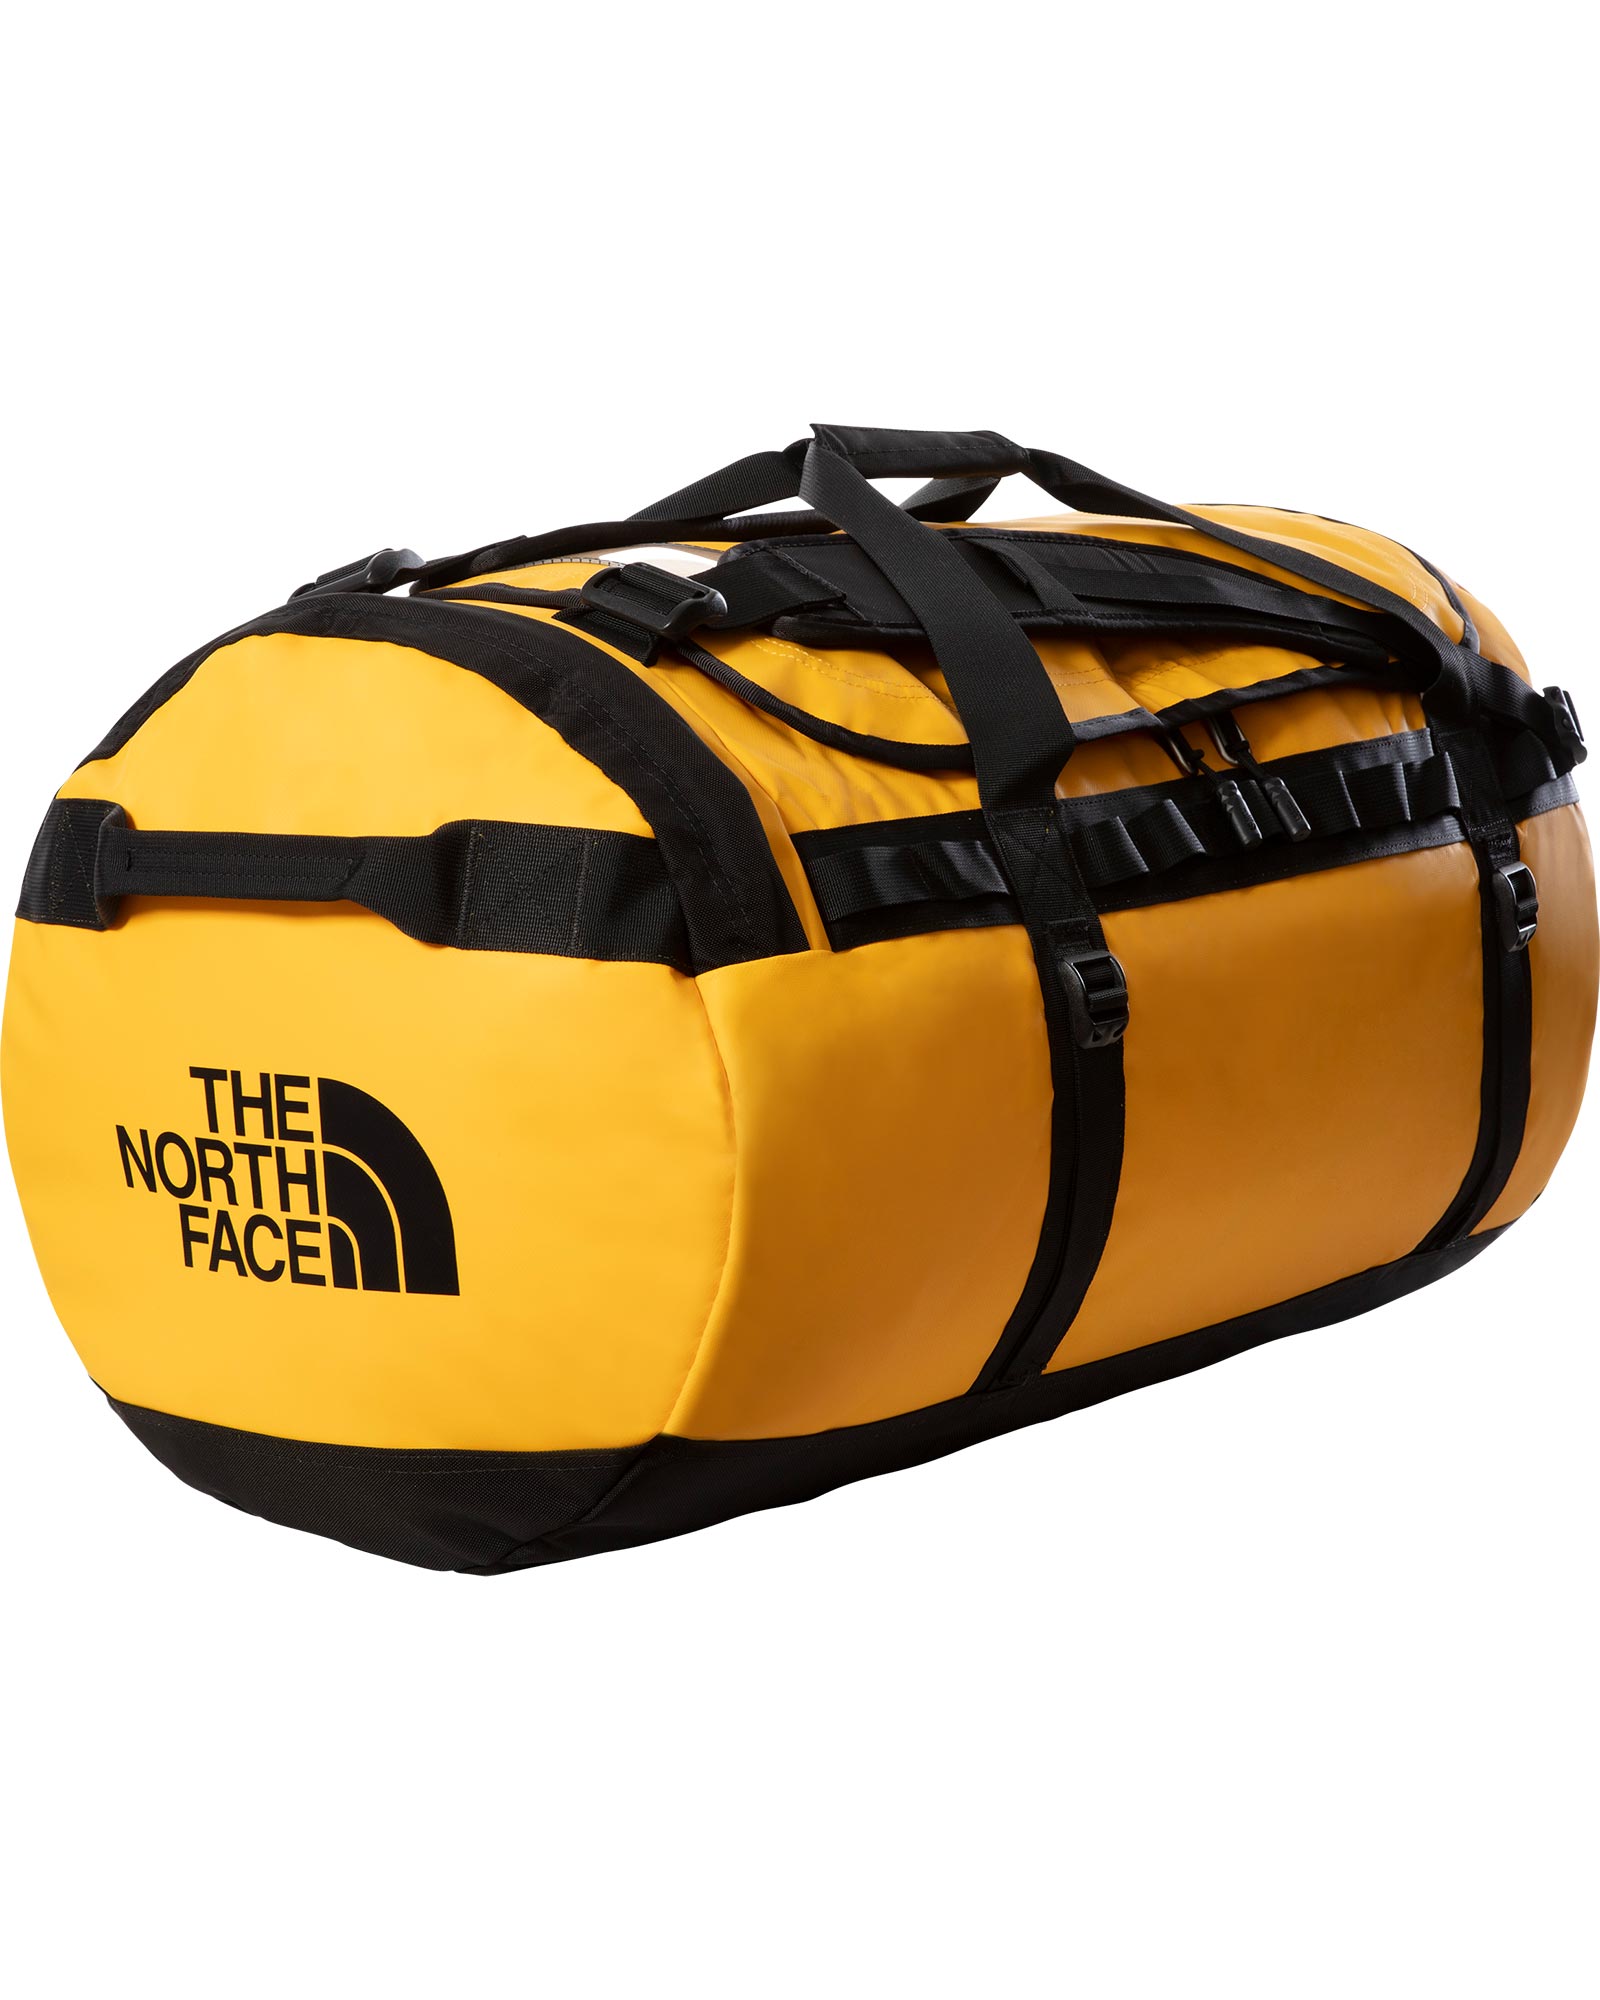 The North Face Base Camp Duffel Large 95L - Summit Gold/TNF Black